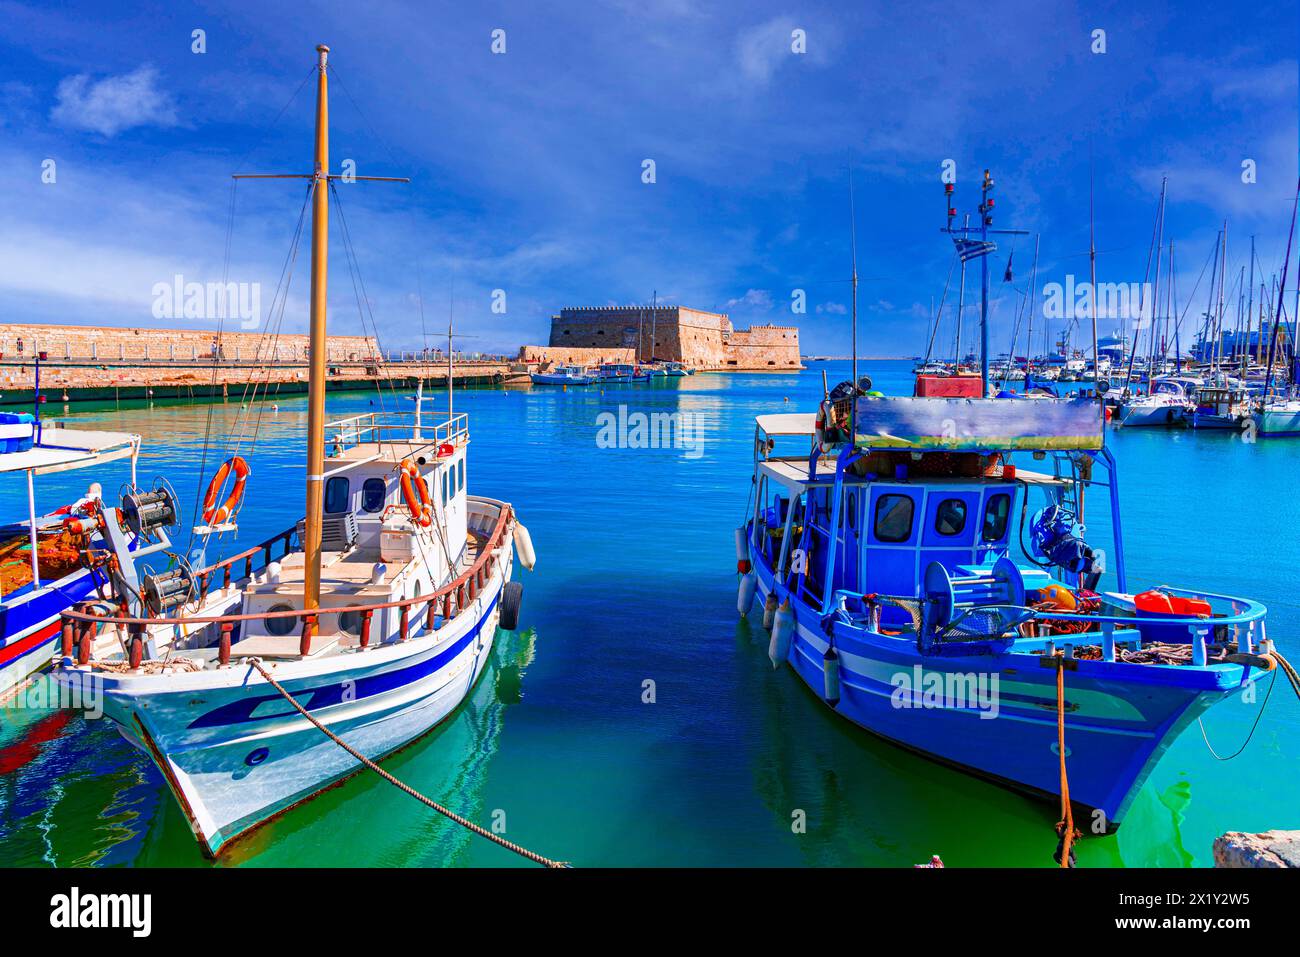 Heraklion, Crete island, Greece: Panoramic view of The Koules or Castello a Mare, a fortress at the entrance of the old port of Heraklion city Stock Photo